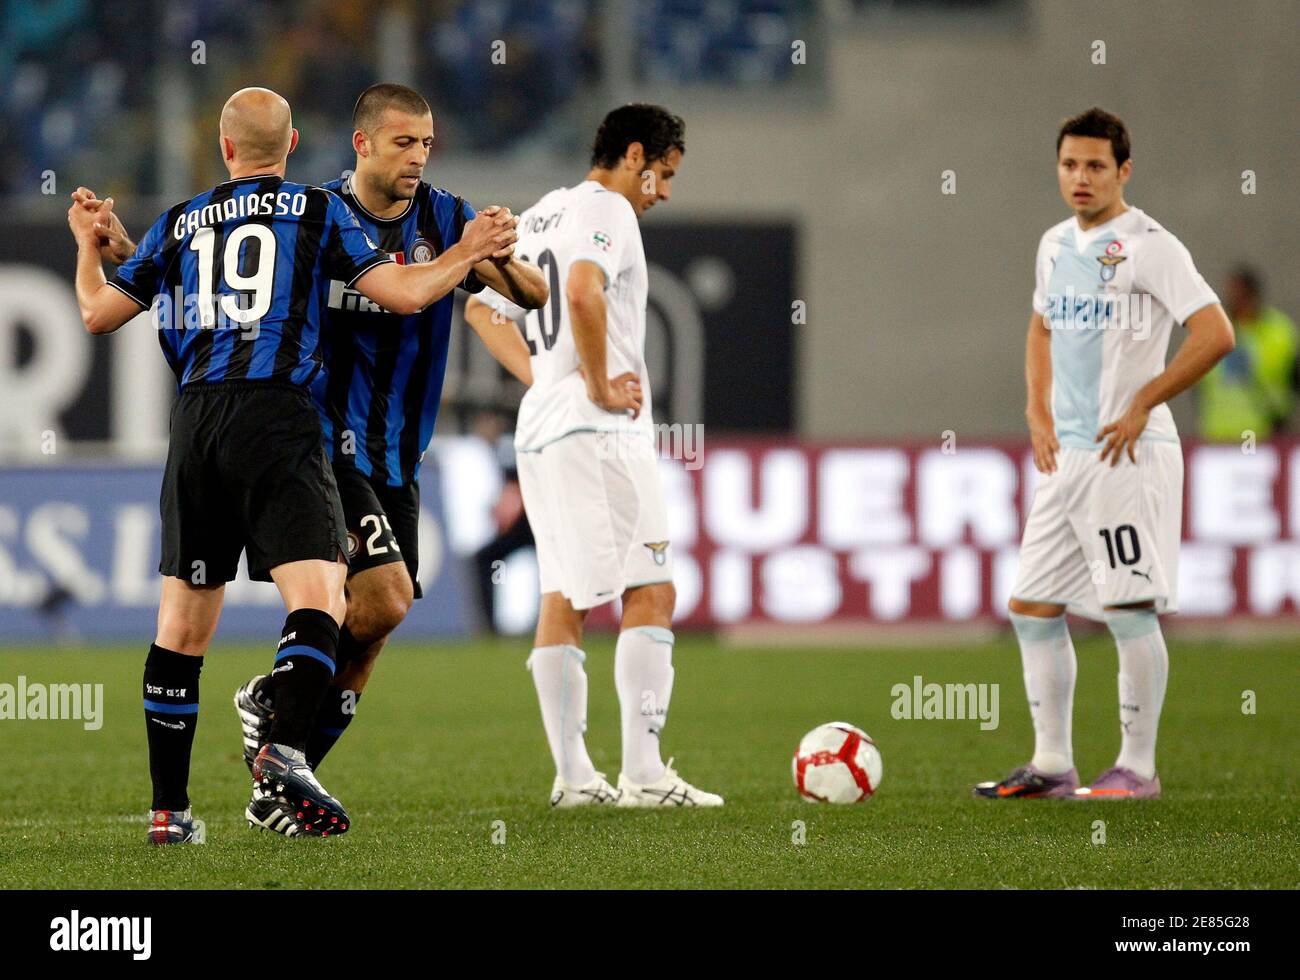 Inter Milan's Walter Samuel (2nd L) celebrates with teammate Esteban  Cambiasso (L) after scoring as Lazio's Sergio Floccari and Mauro Zarate (R)  watch during their Italian Serie A soccer match at the